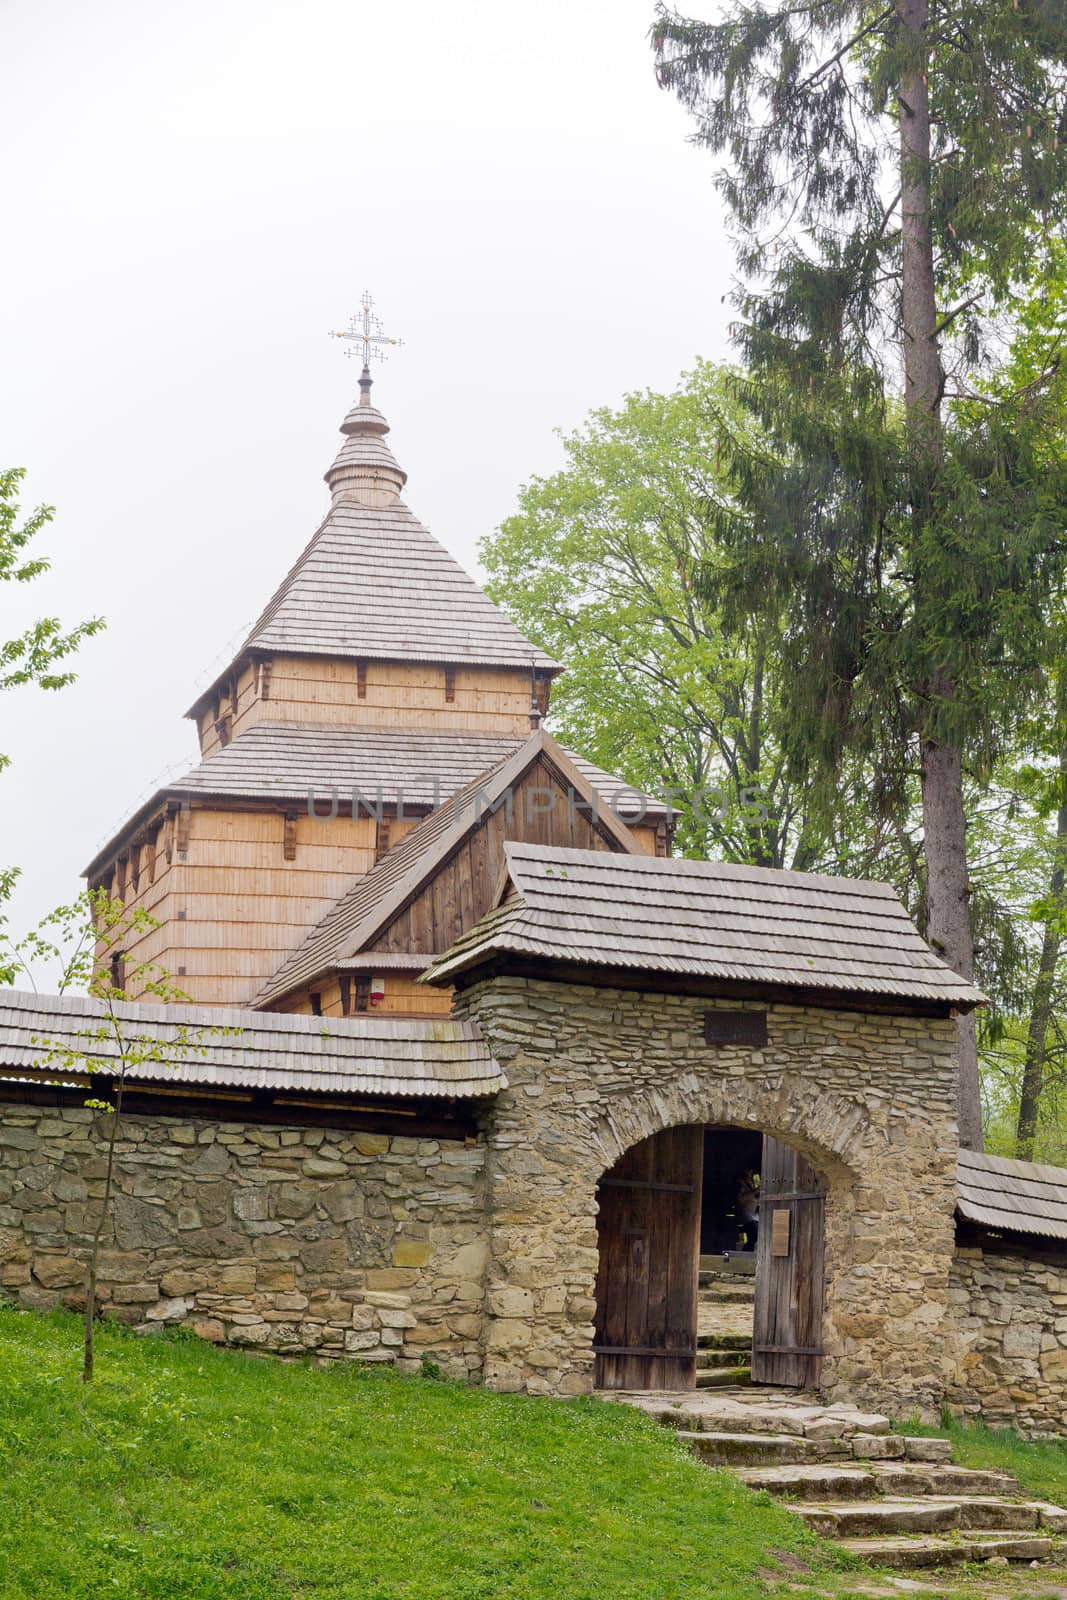 the oldest eastern orthodox church architecture in poland in radruz from 16th century